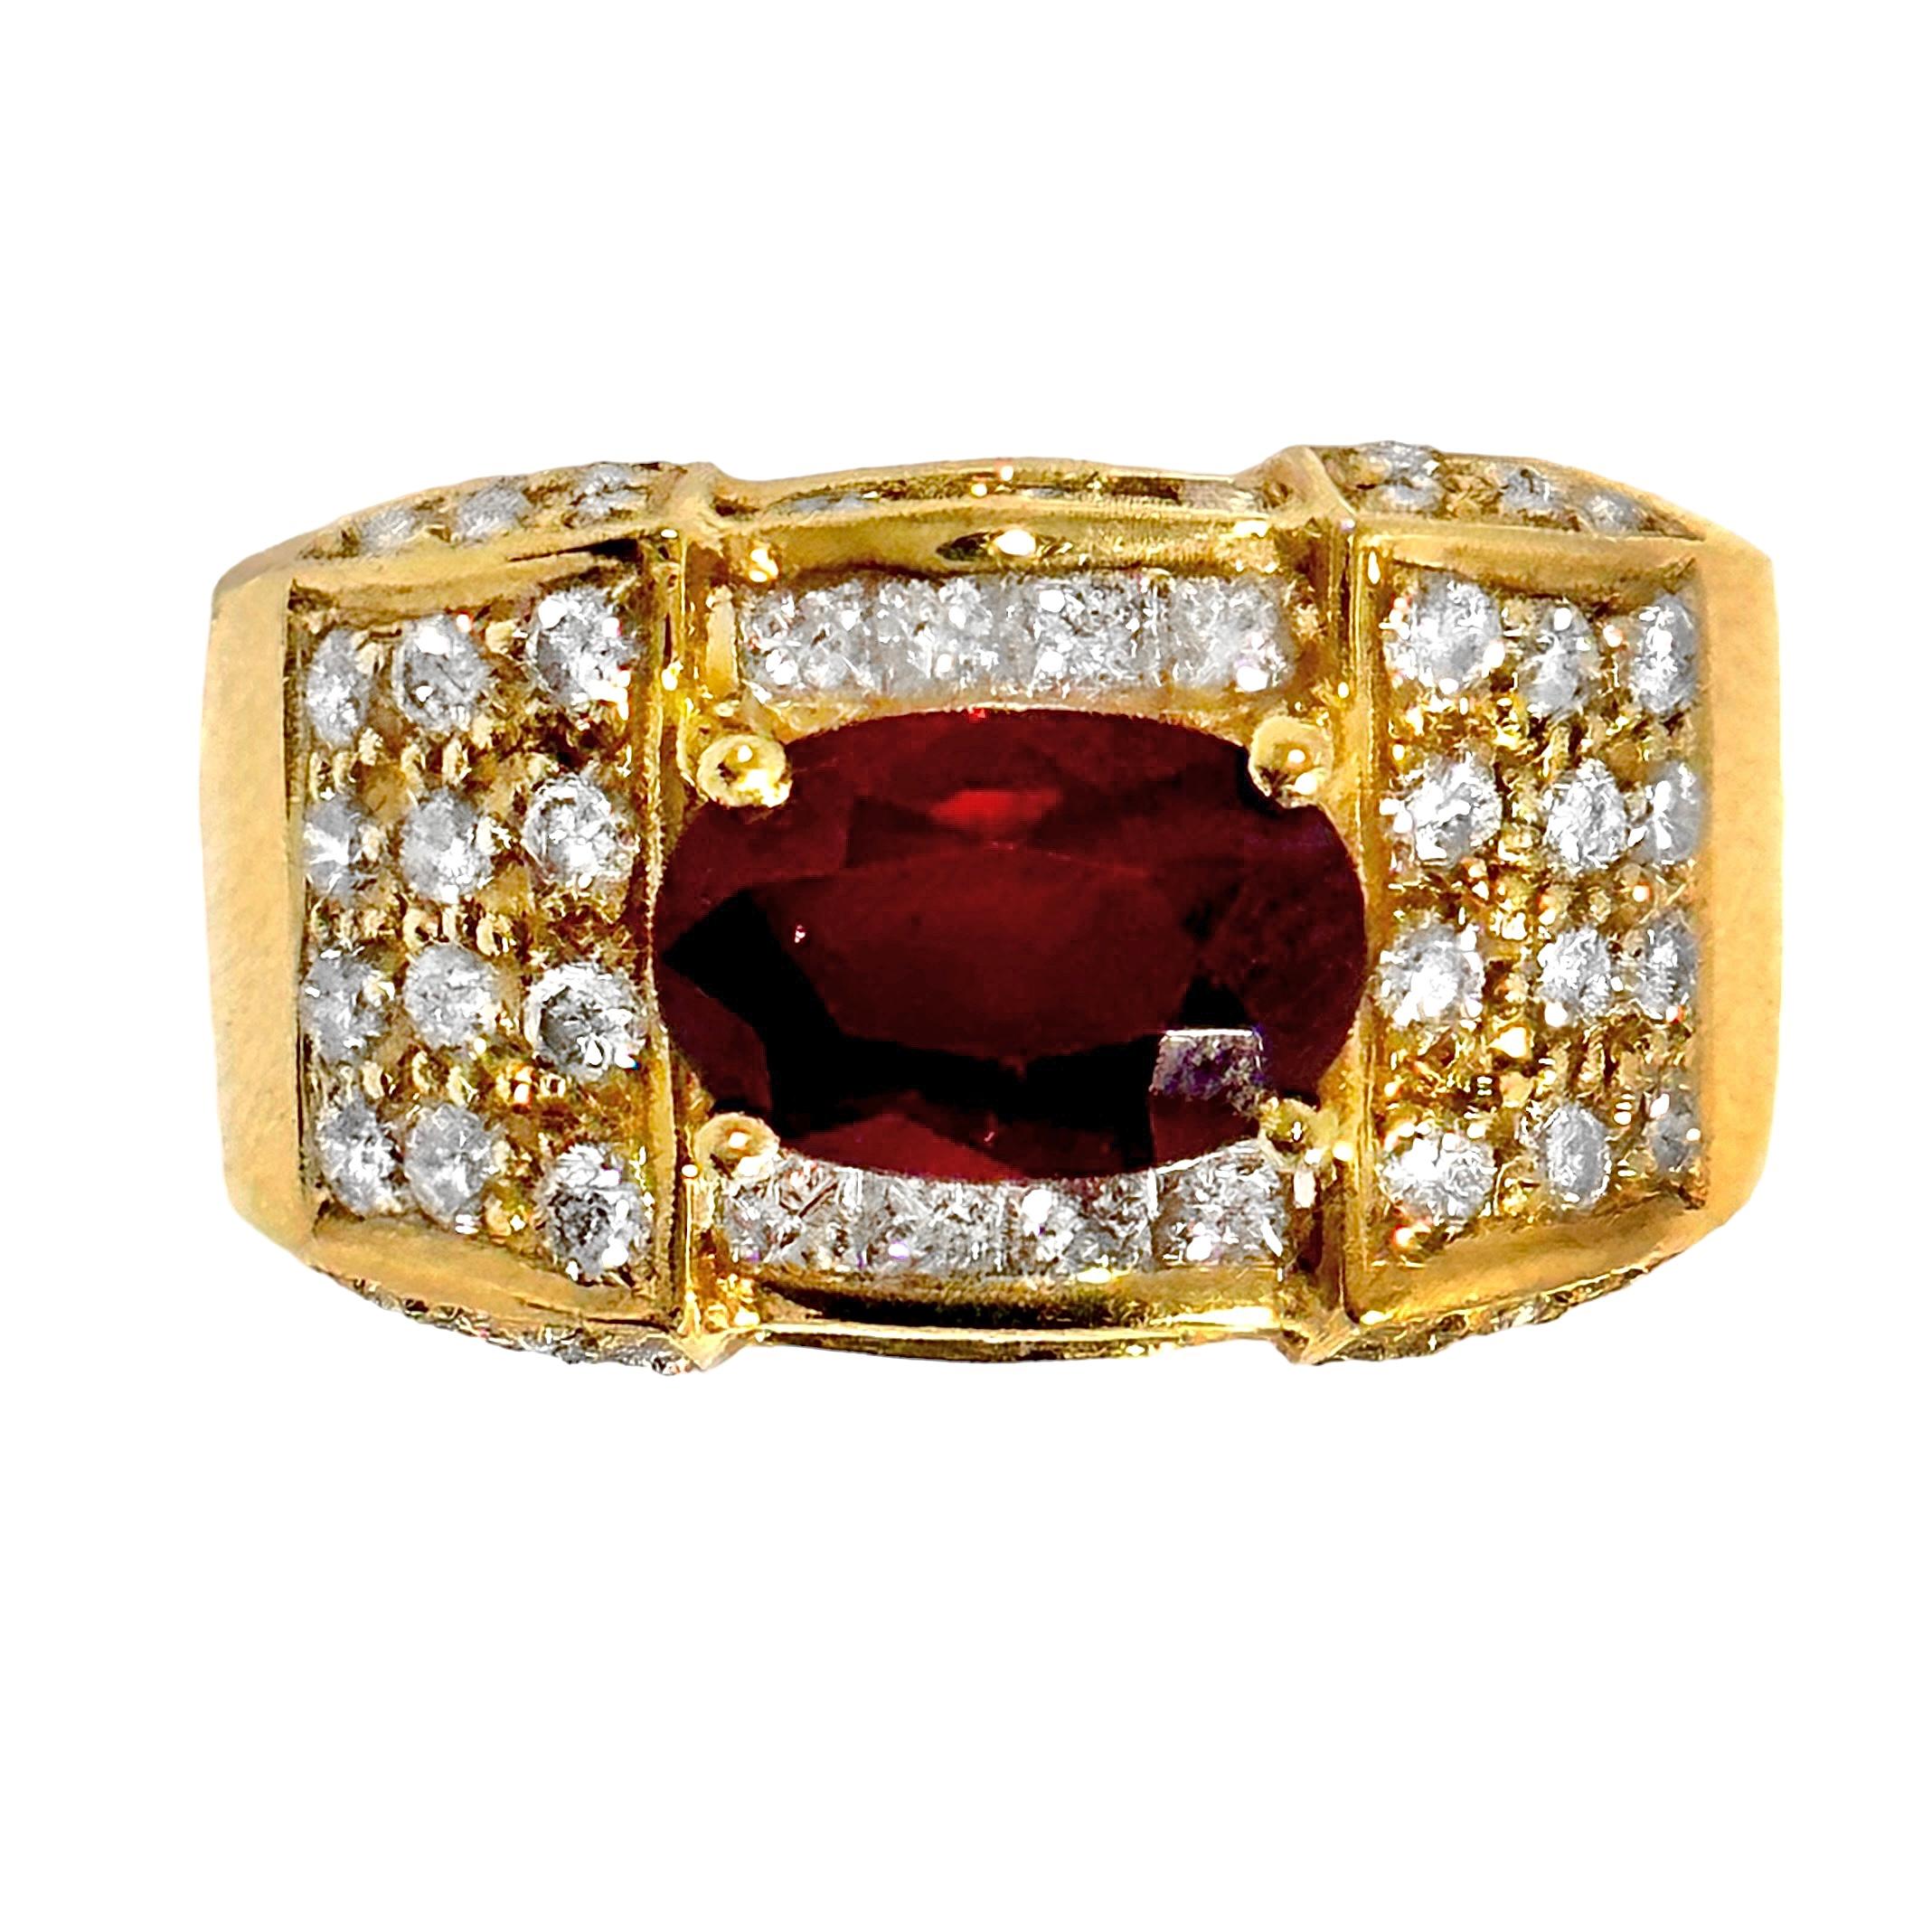 Modern Late-20th Century Tailored 18k Yellow Gold, Ruby and Diamond Cocktail Ring For Sale